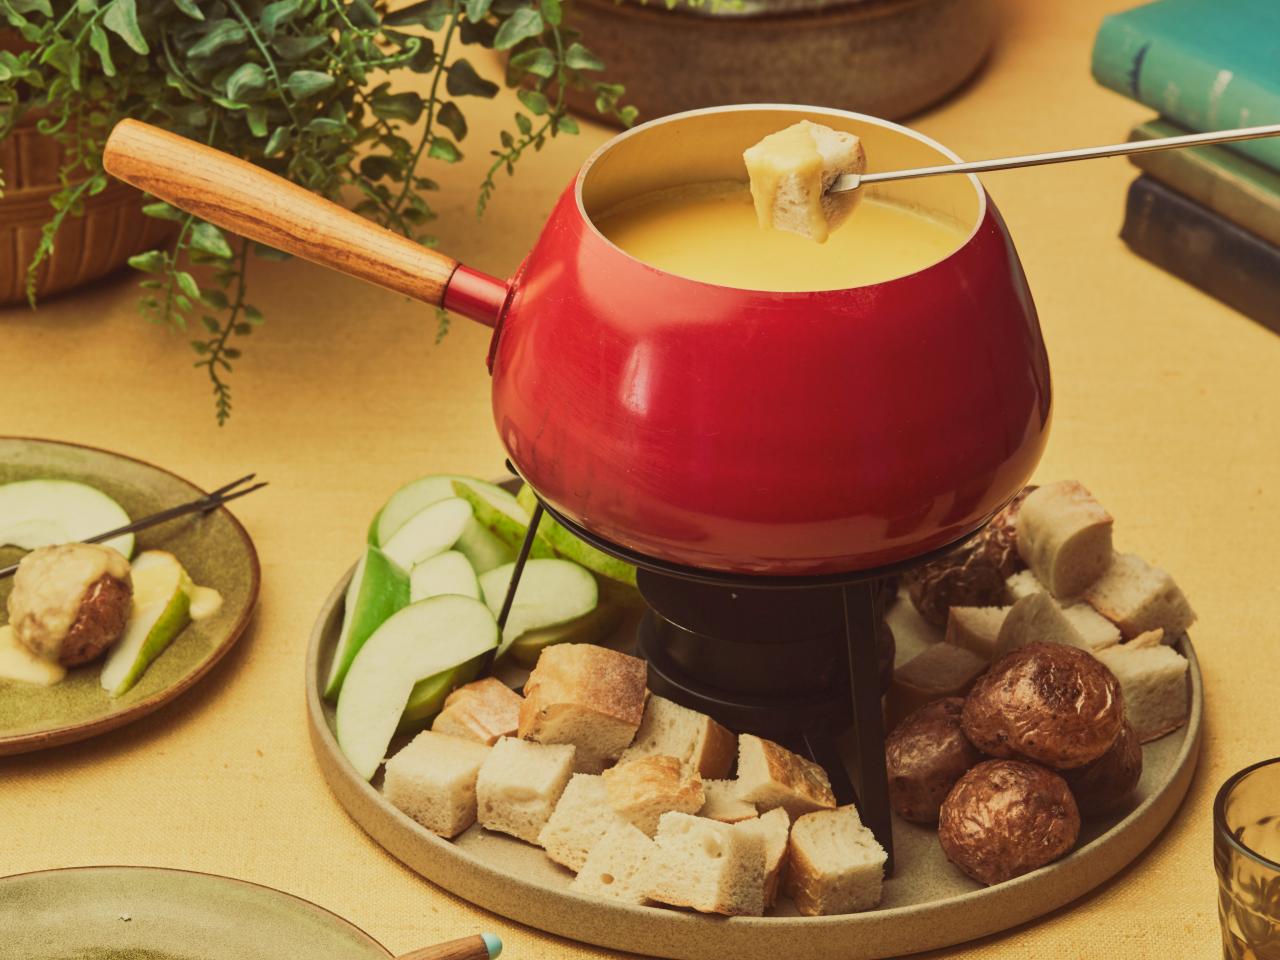 A Festive New Year's Eve Fondue Party | Heinen's Grocery Store